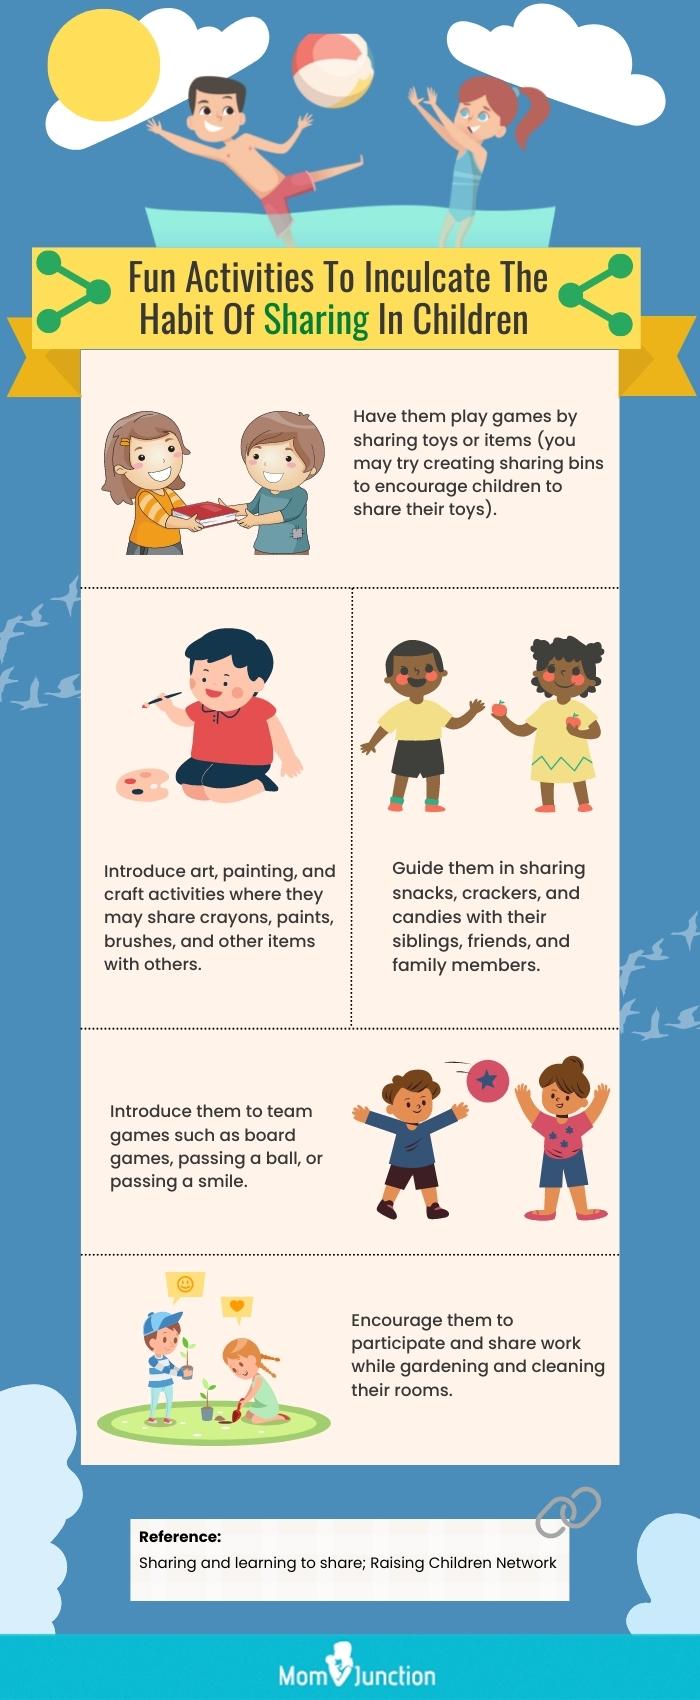 fun activities to inculcate the habit of sharing in children [infographic]